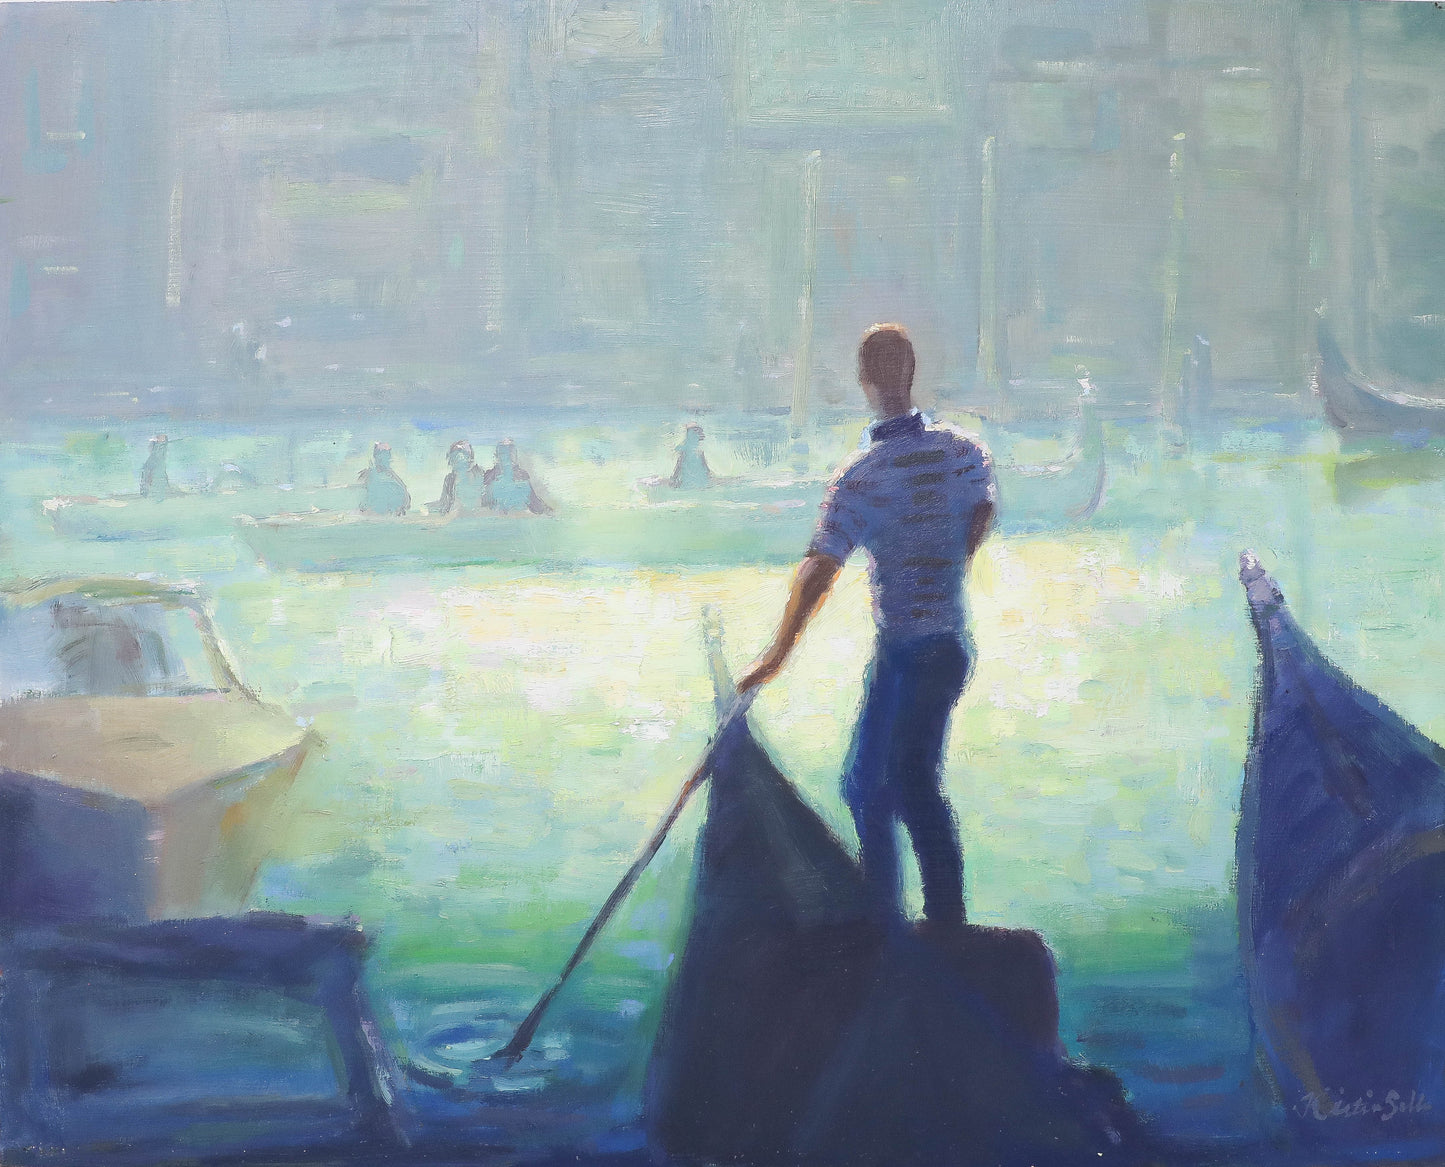 "The Gondolier", 16x20 Original Oil Painting by Artist Kristina Sellers